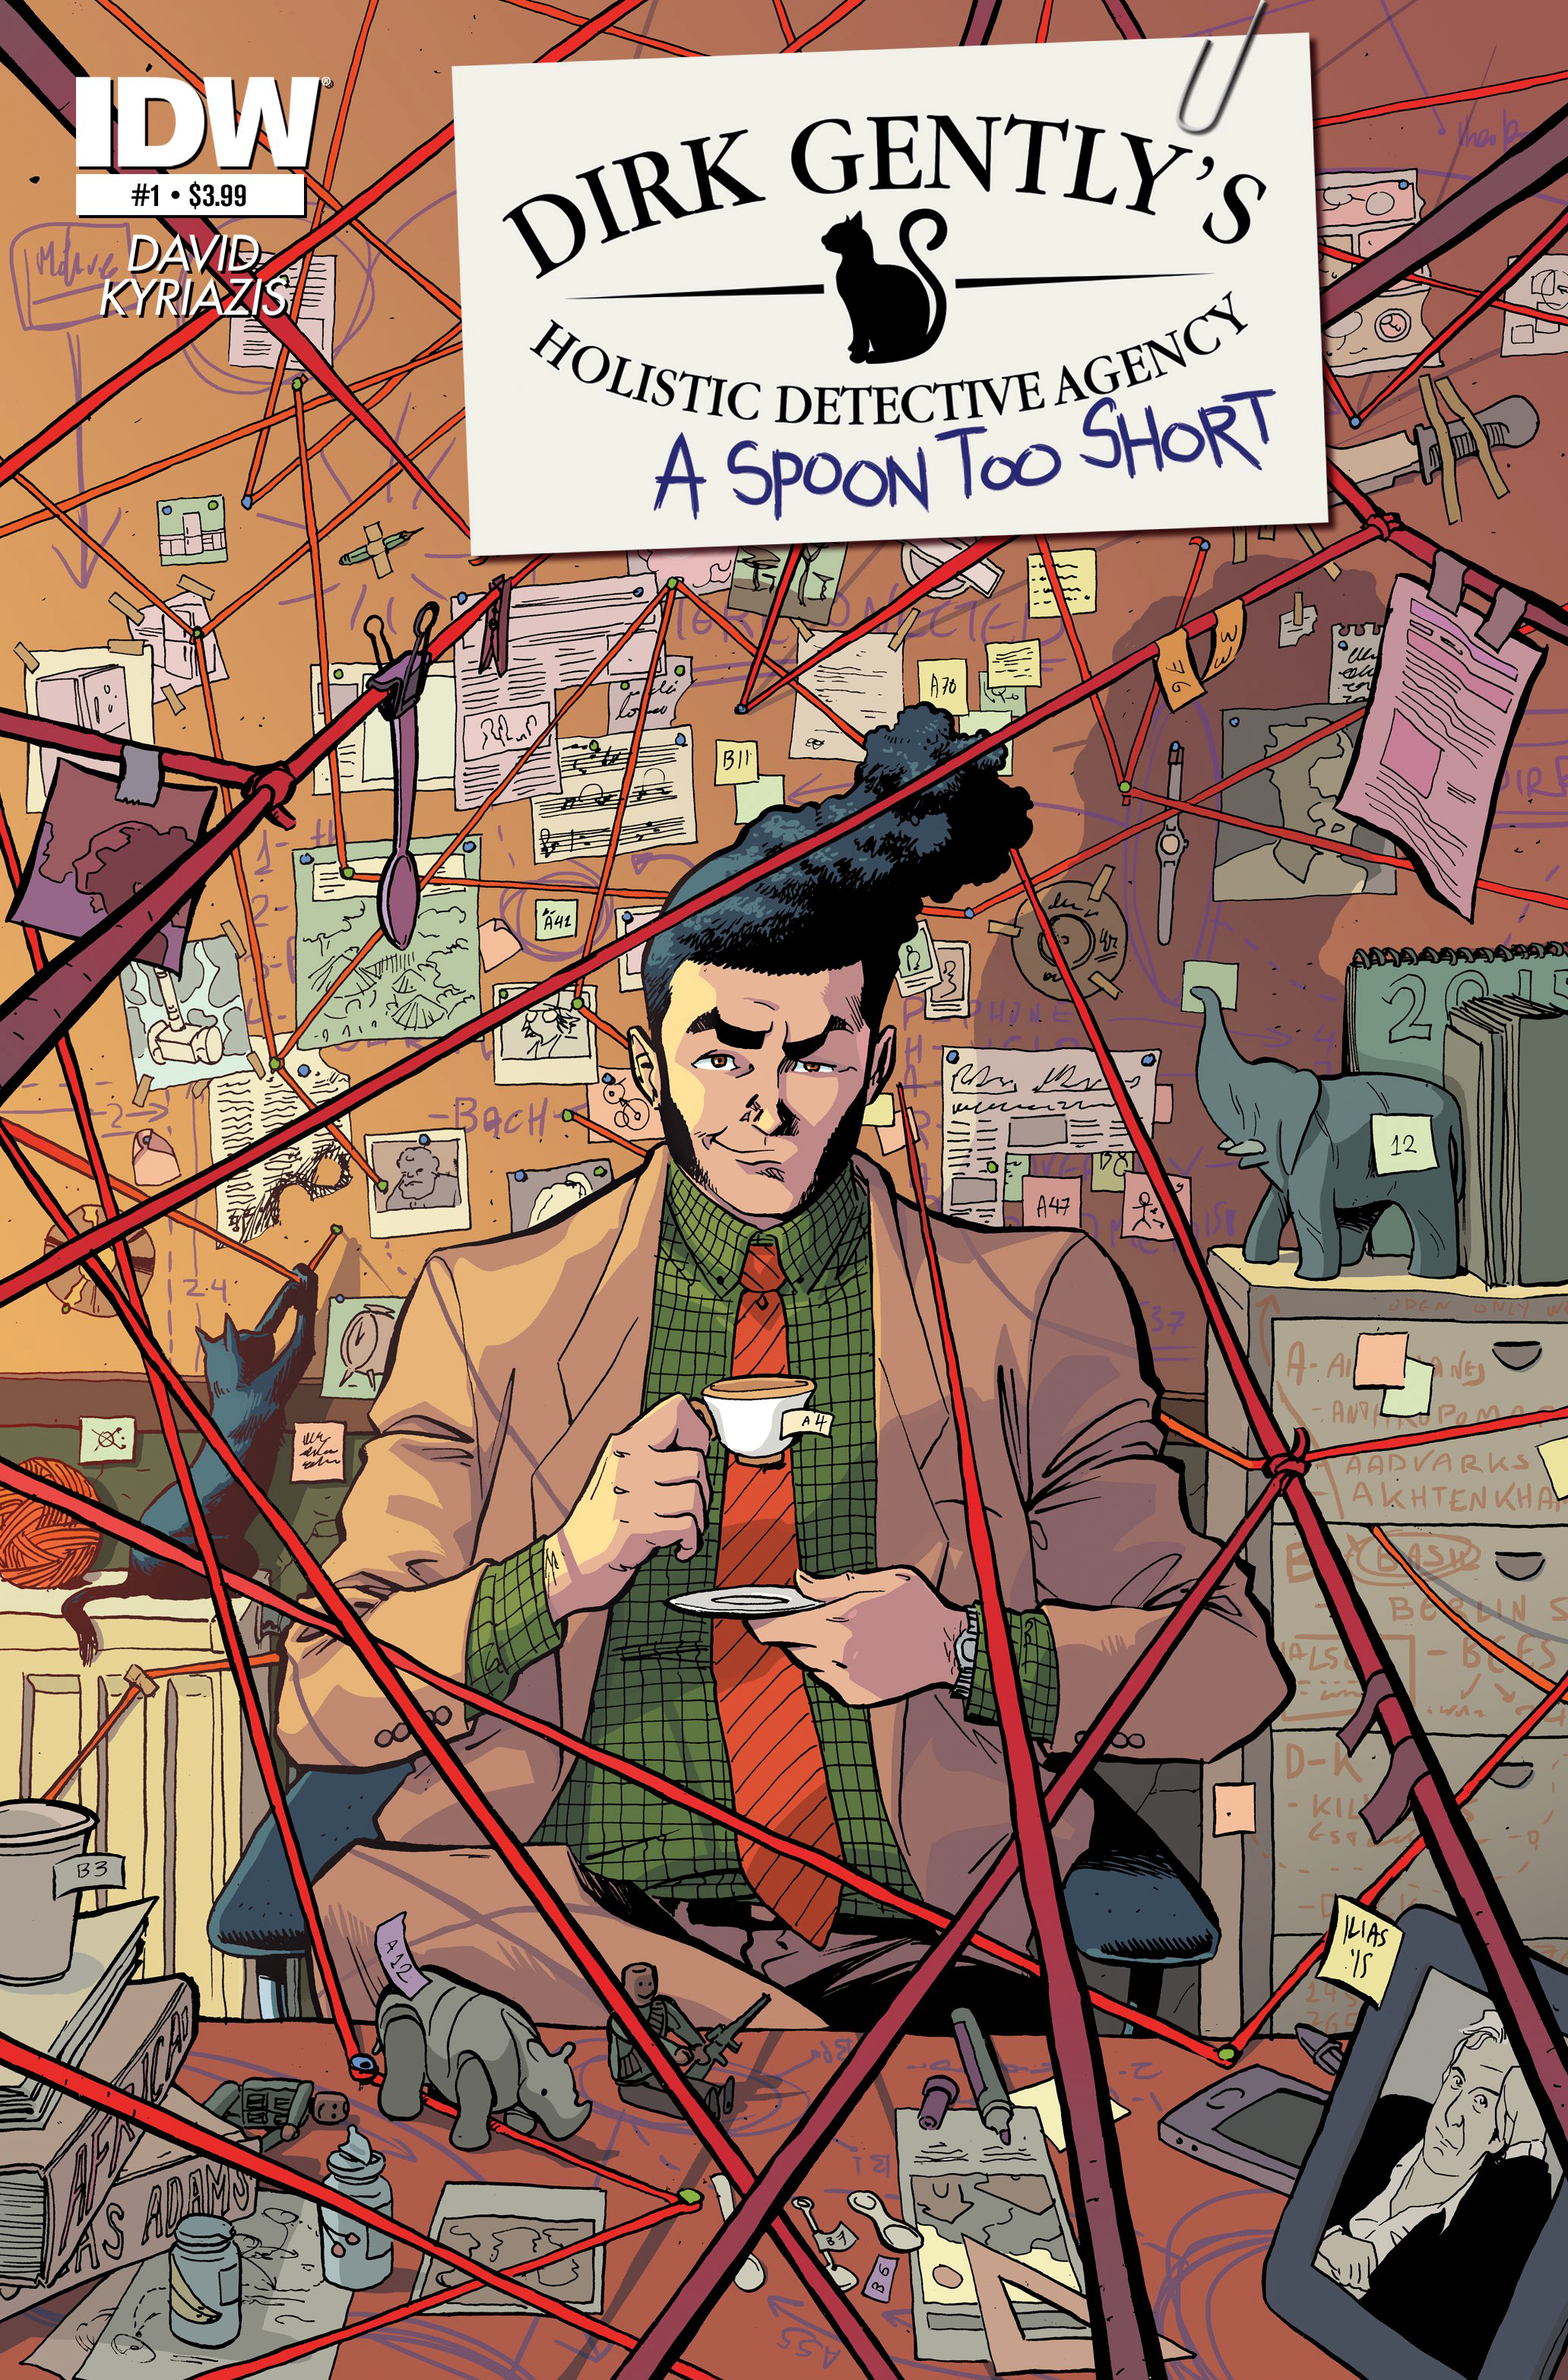 DIRK GENTLY A SPOON TOO SHORT #1 (OF 5)